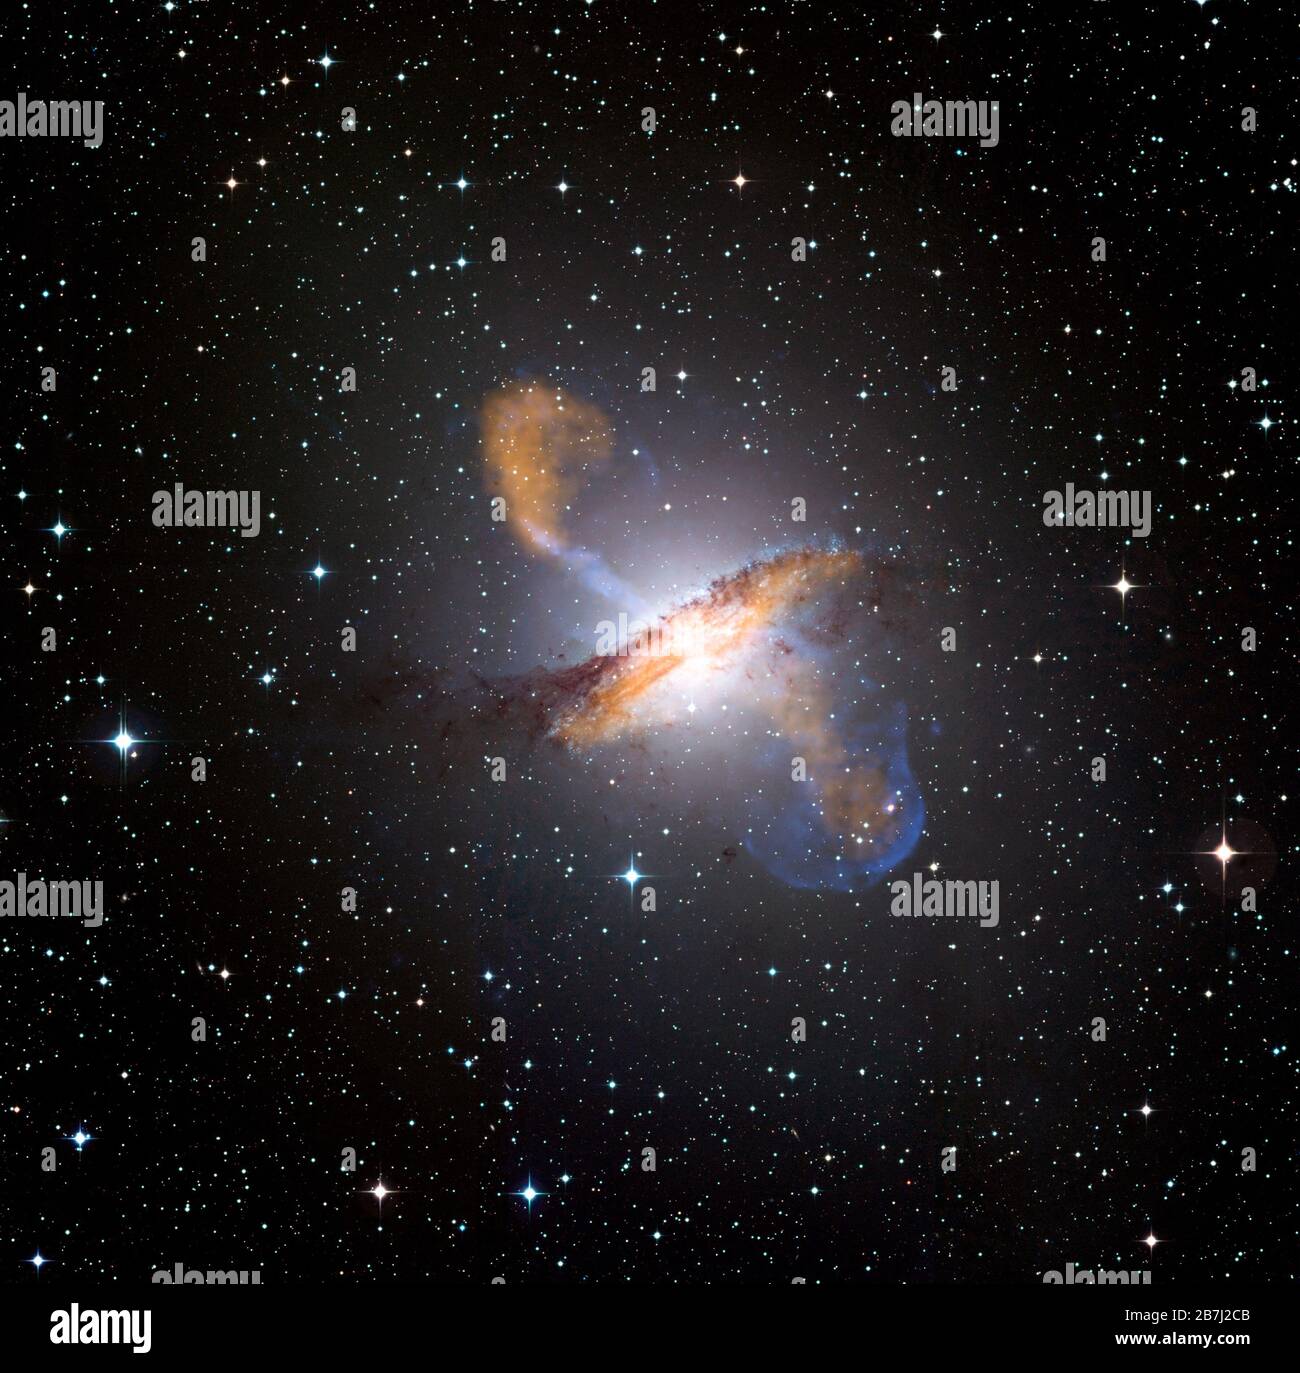 CENTAURUS A, OUTER SPACE - 29 Jan 2009 - This 2009 image of Centaurus A shows a spectacular new view of a supermassive black hole's power. Jets and lo Stock Photo